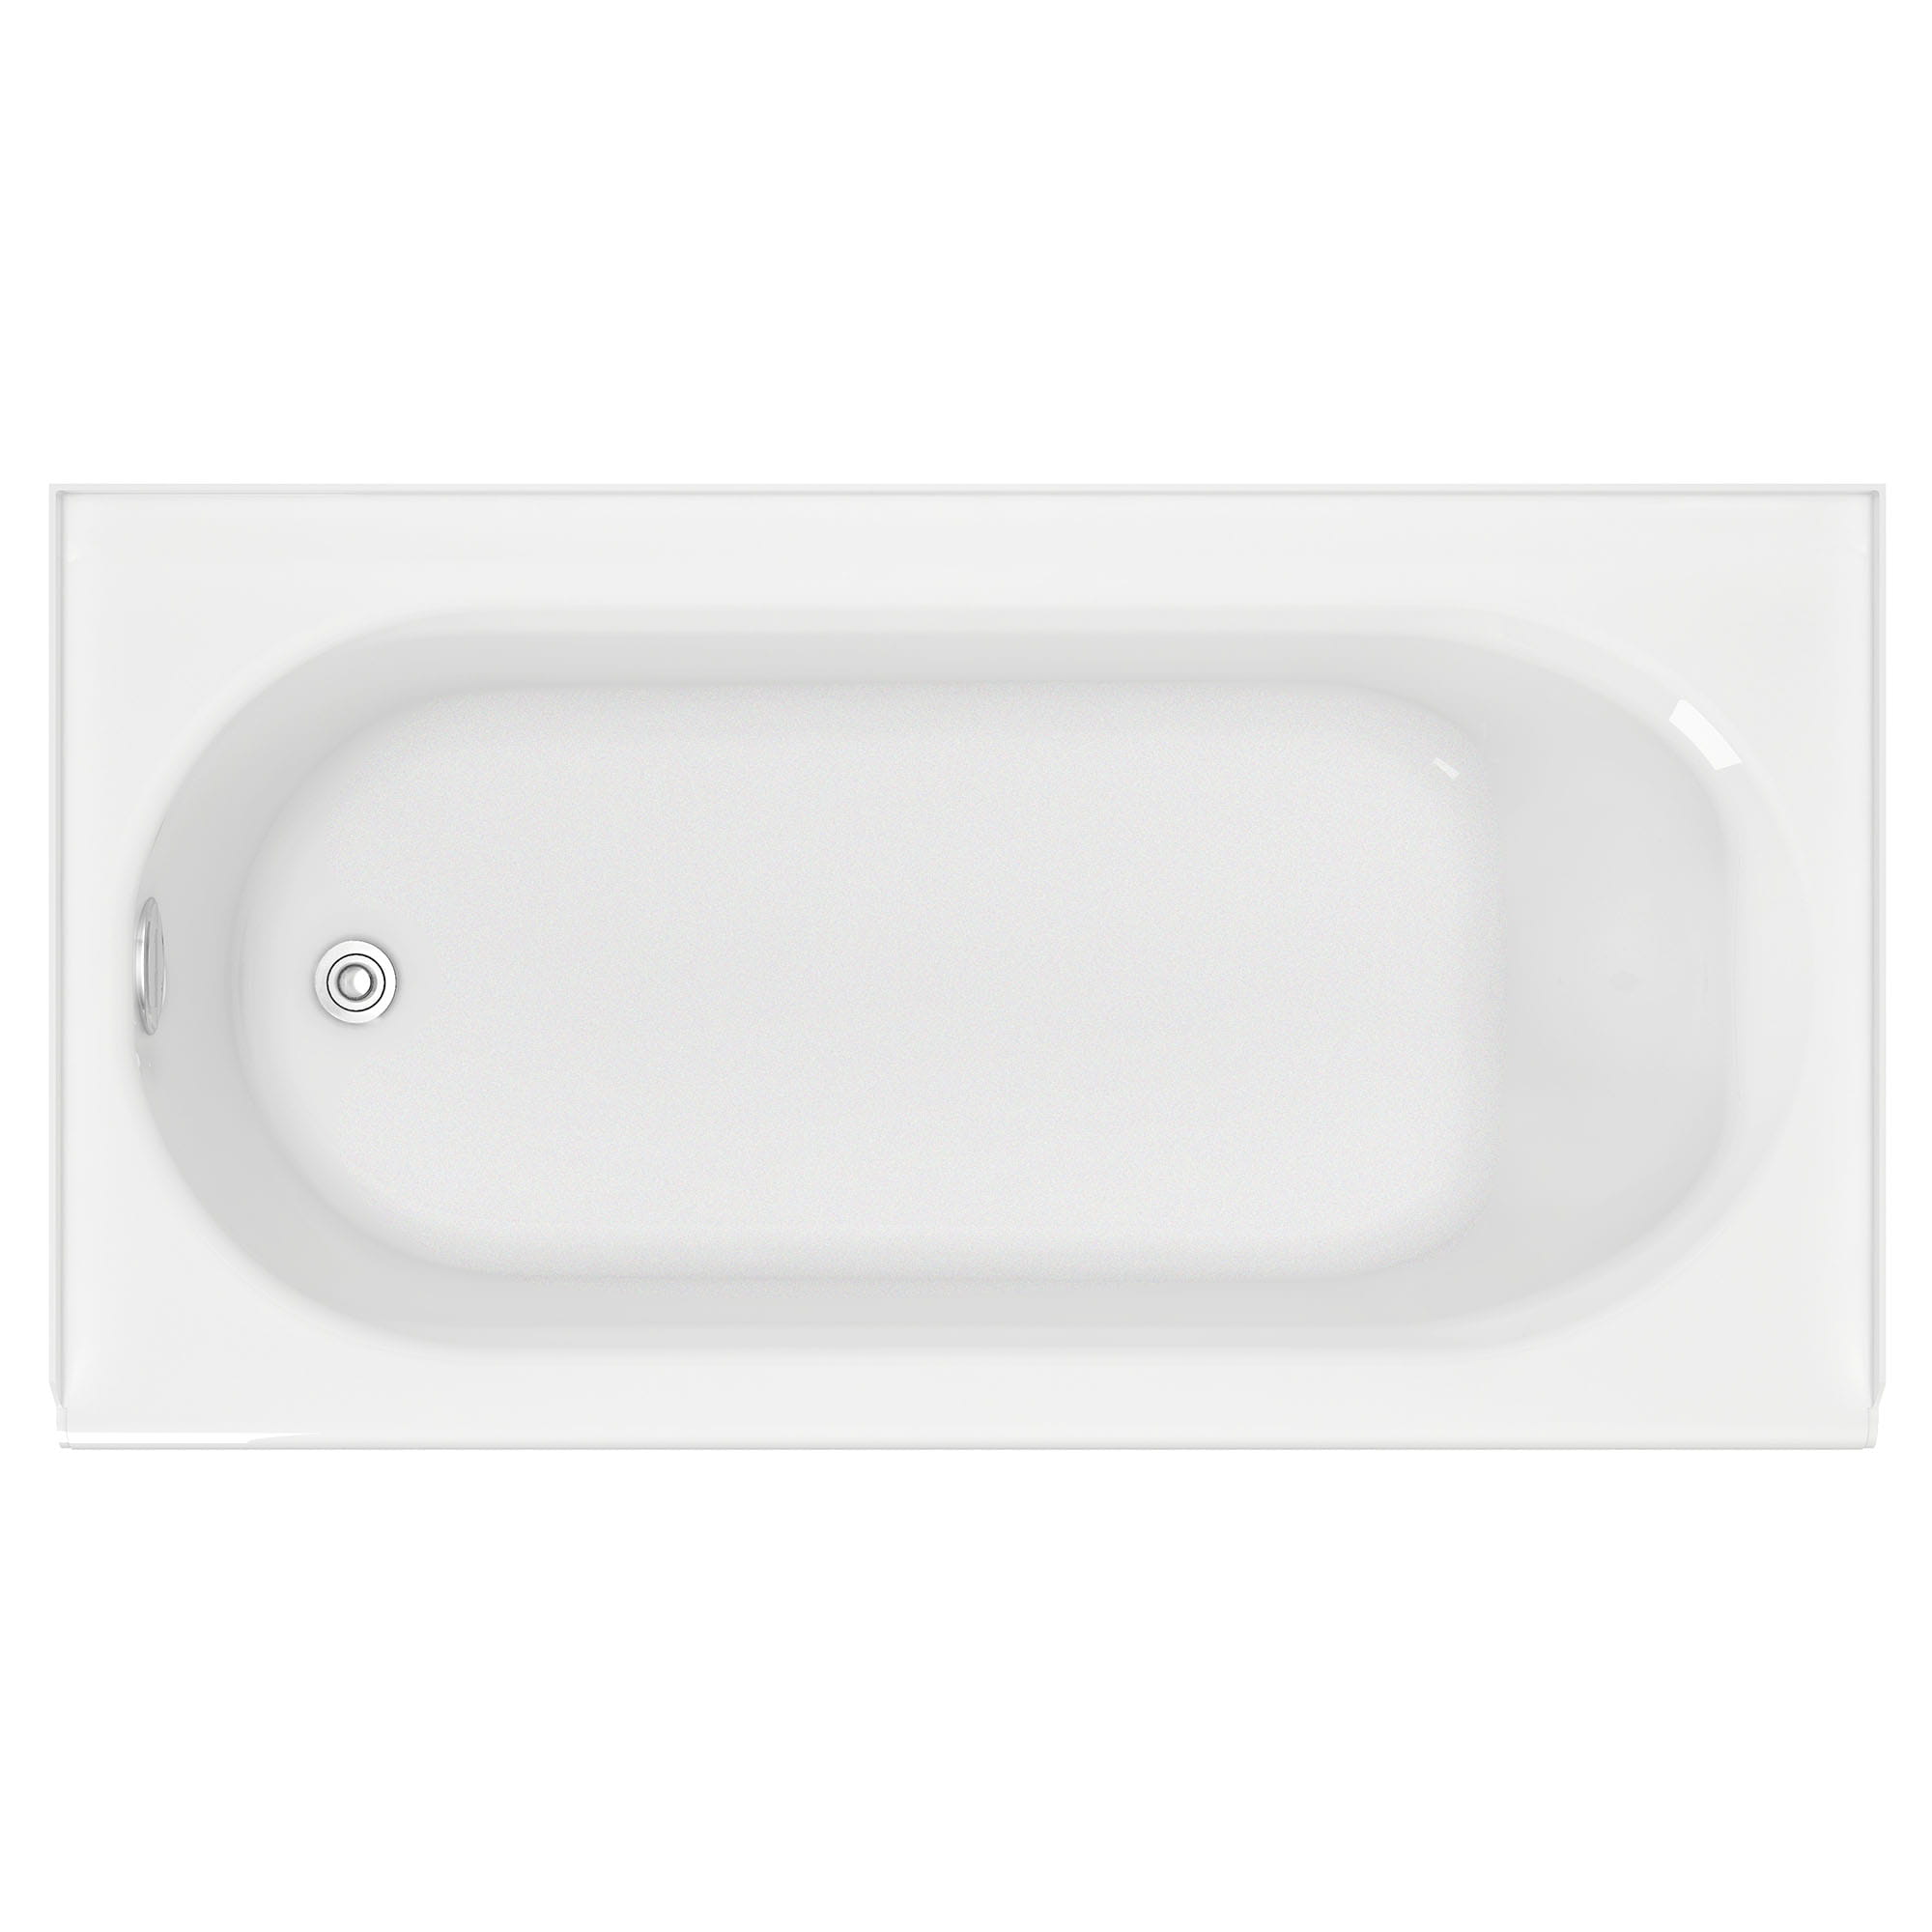 Princeton® Americast® 60 x 34-Inch Integral Apron Bathtub Above Floor Rough Left-Hand Outlet Luxury Ledge with Integral Drain